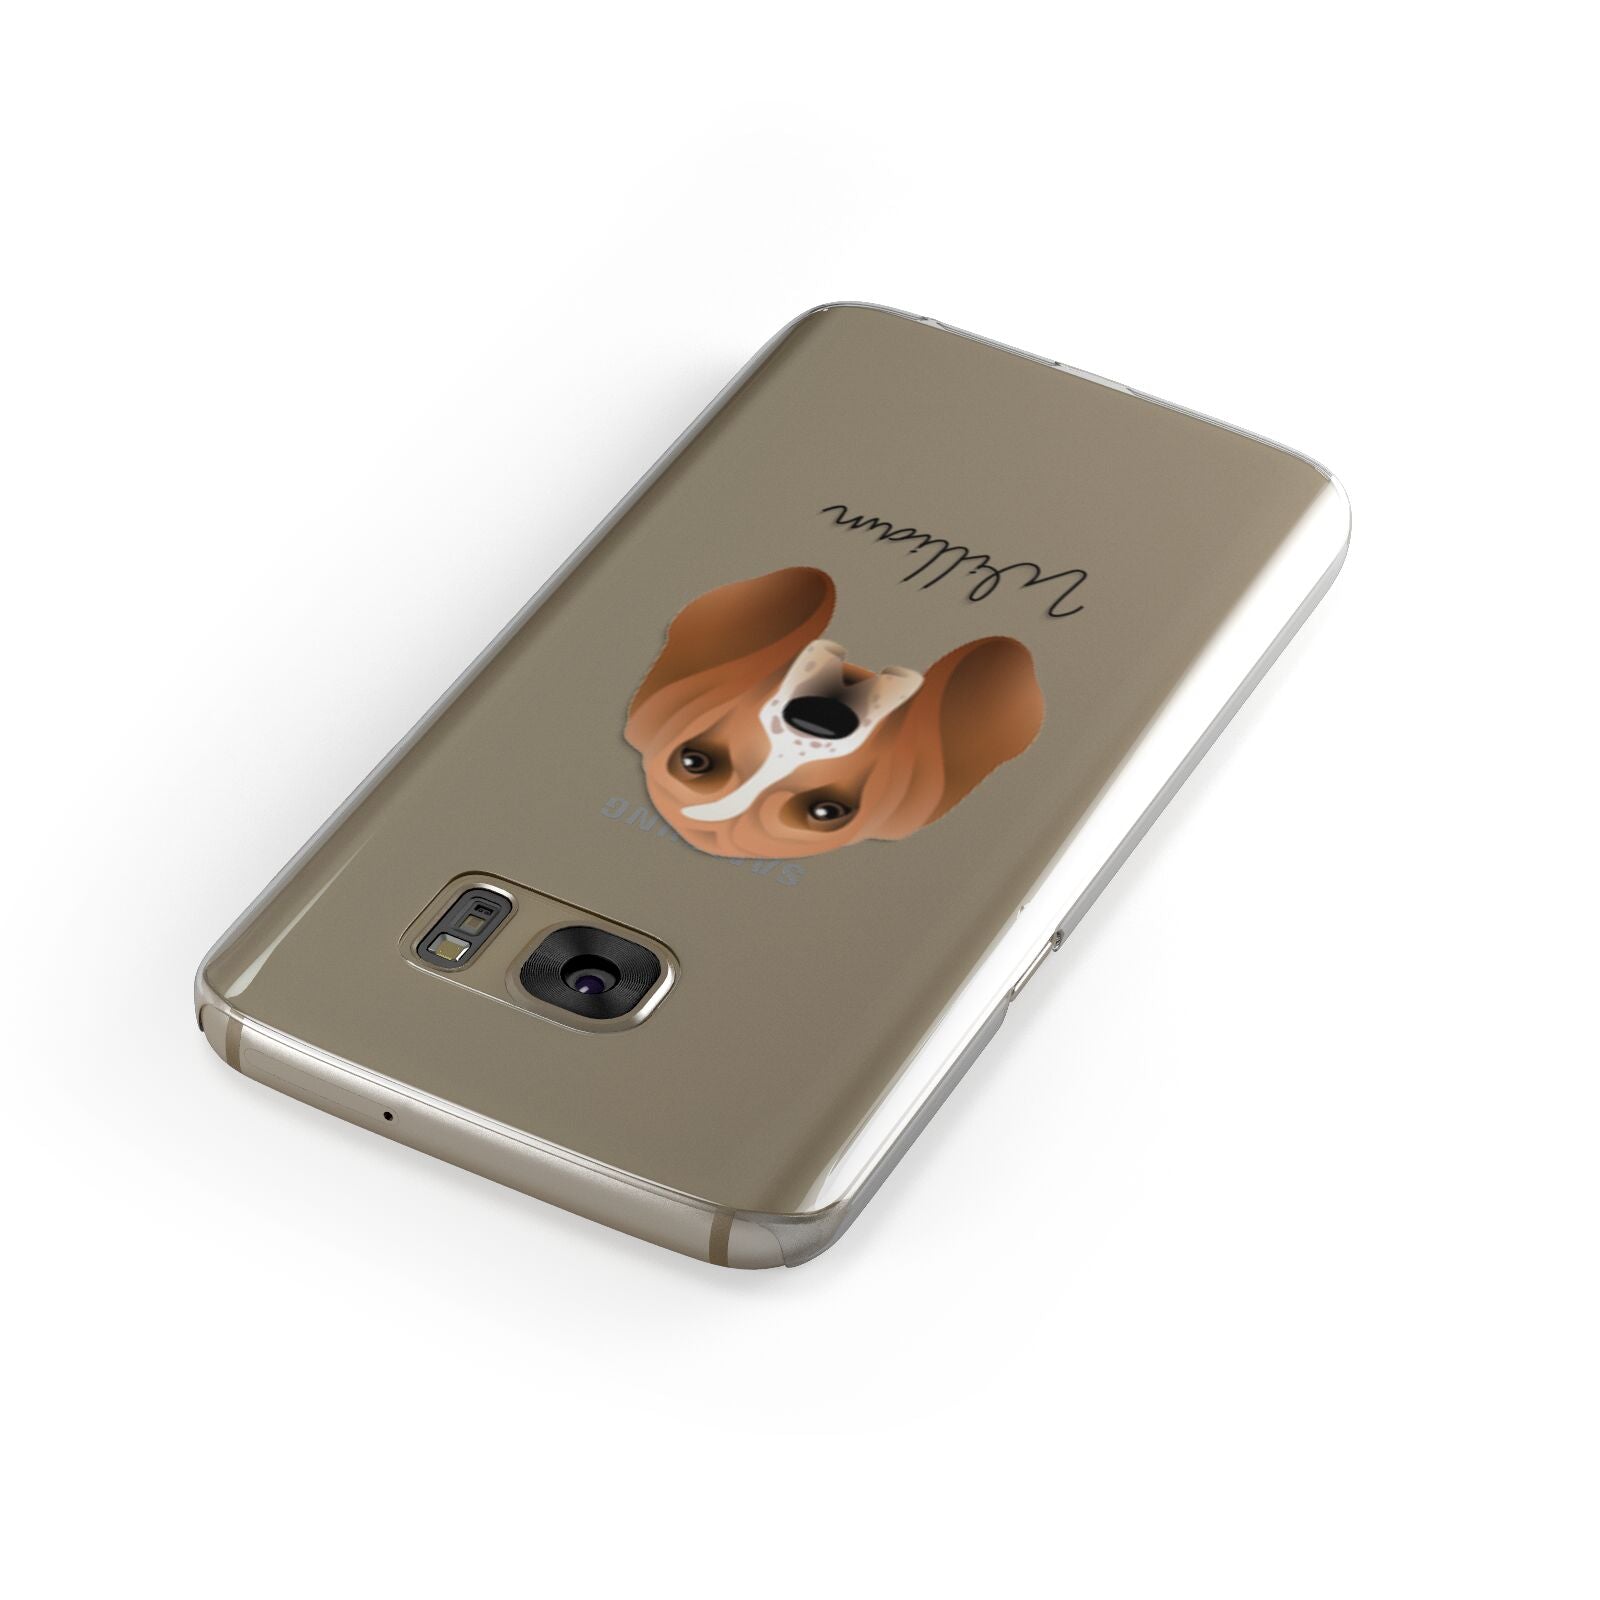 Basset Hound Personalised Samsung Galaxy Case Front Close Up